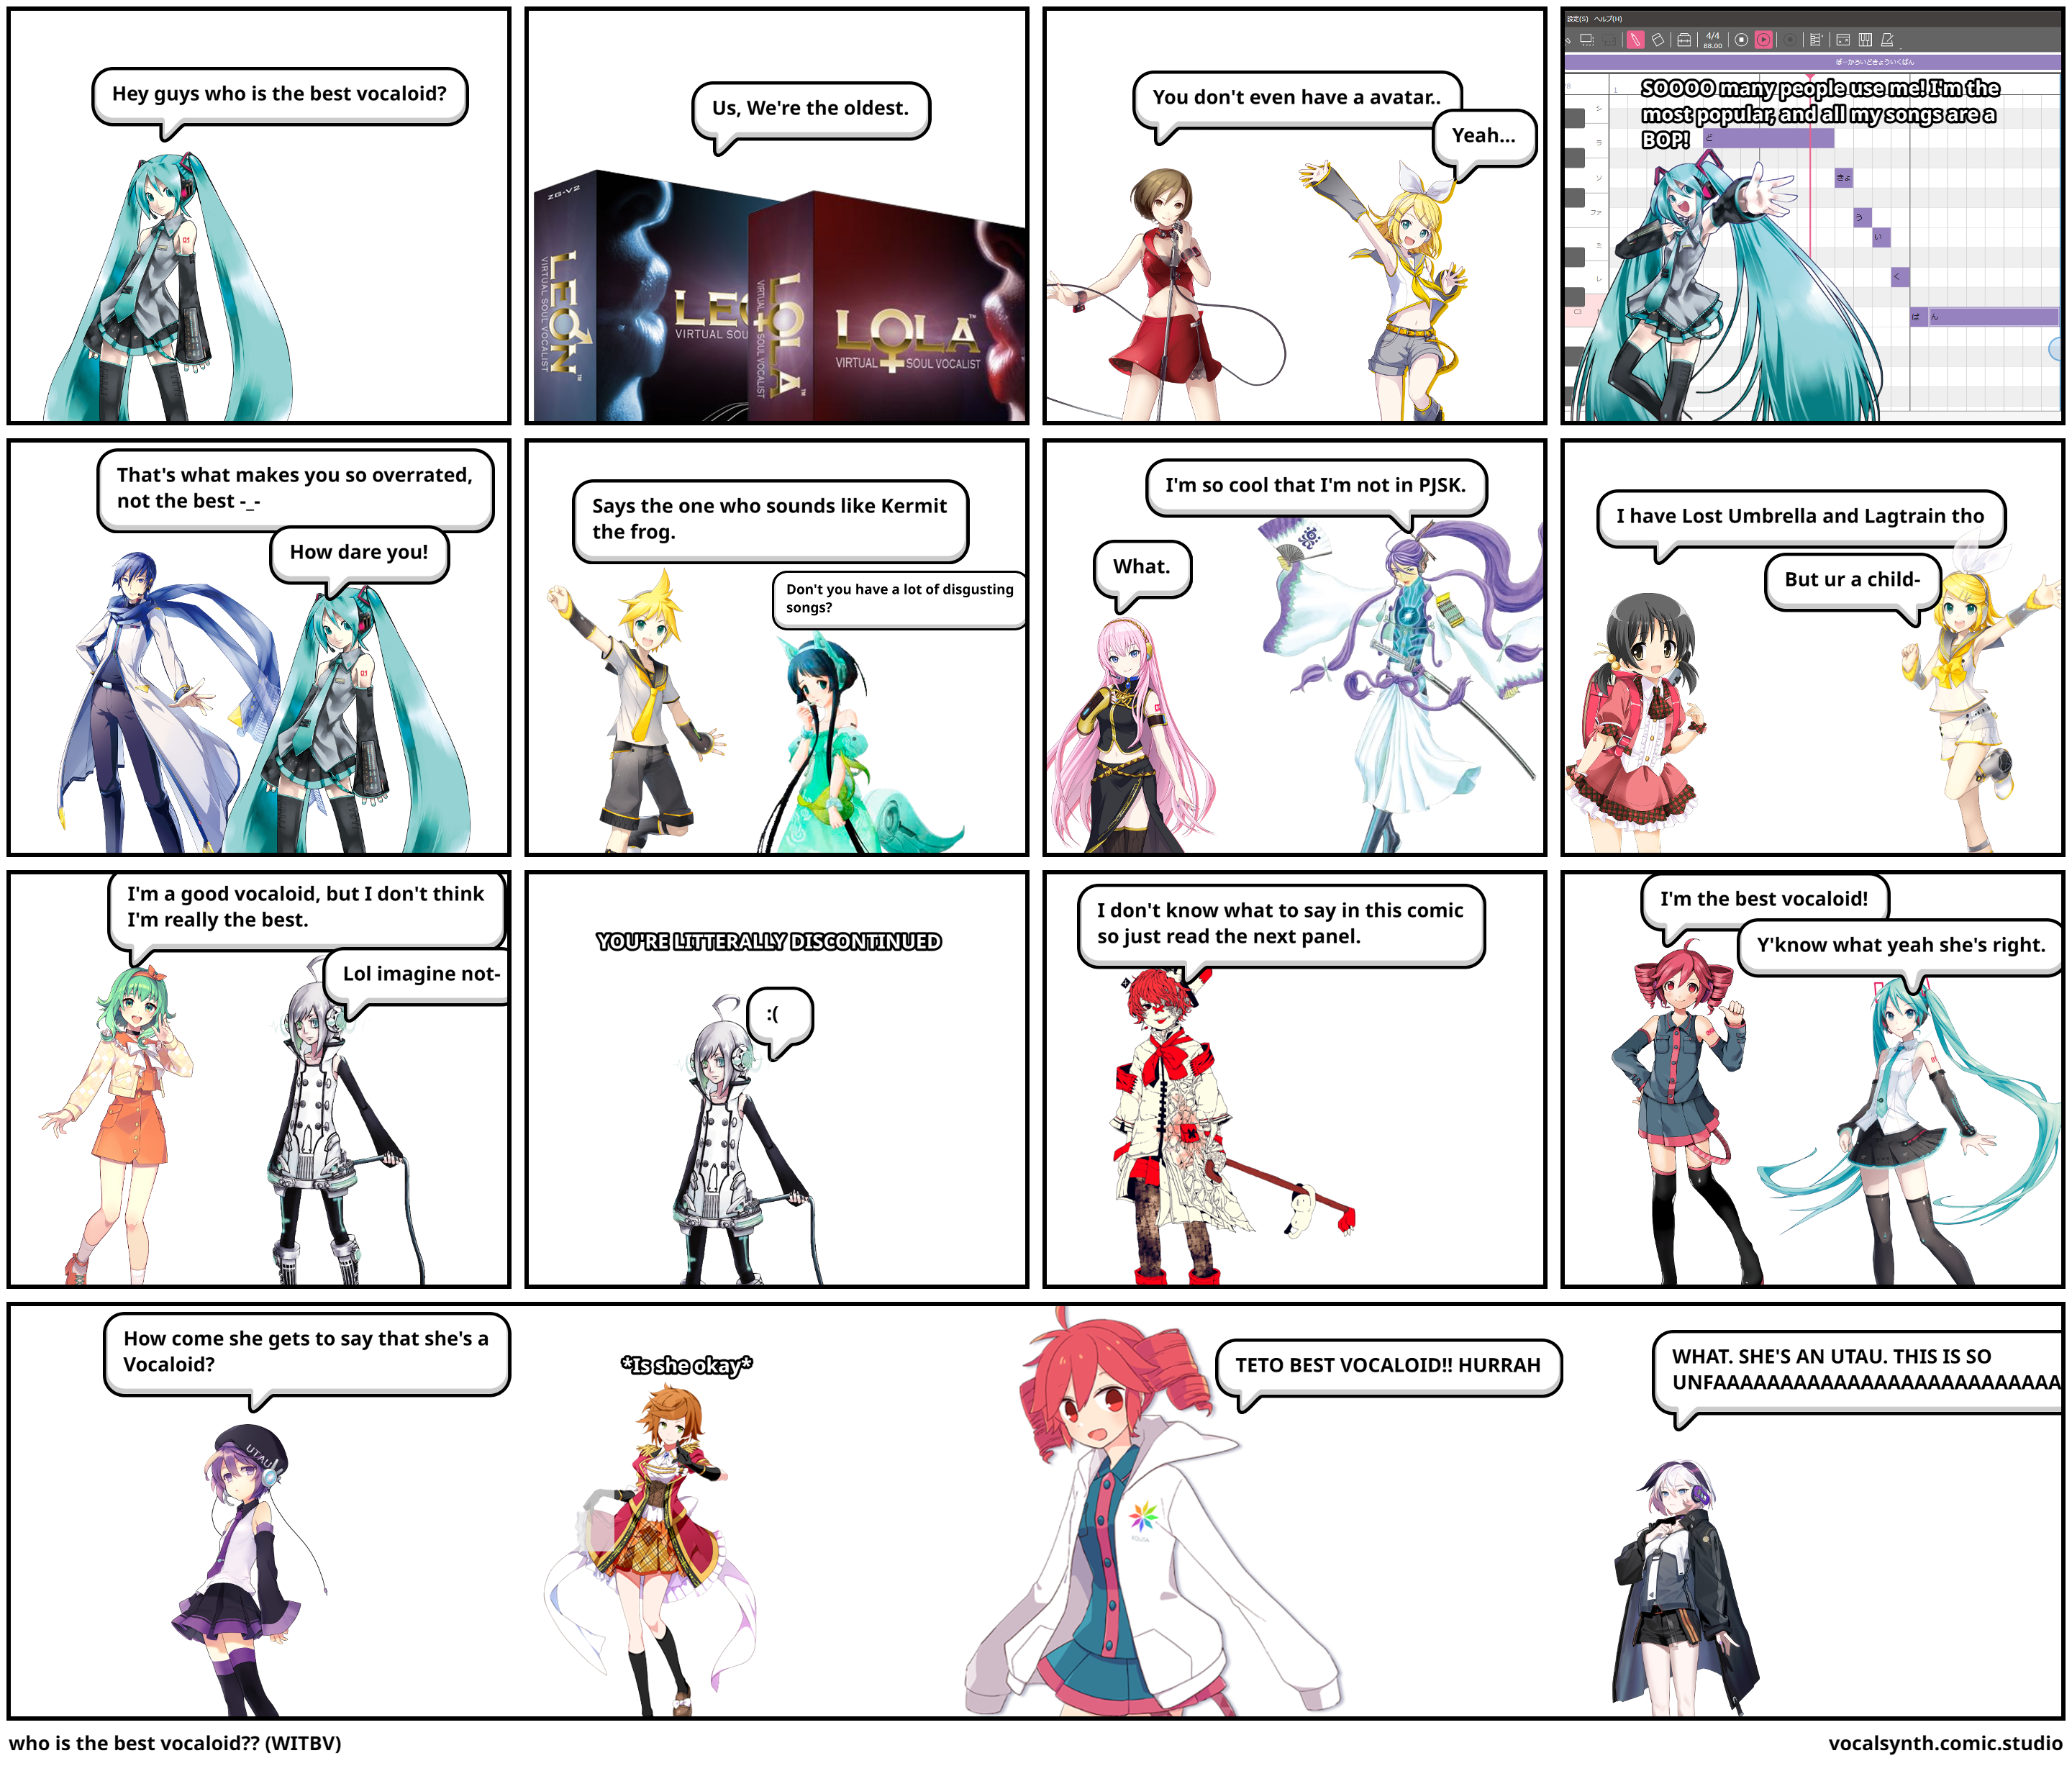 who is the best vocaloid?? (WITBV)